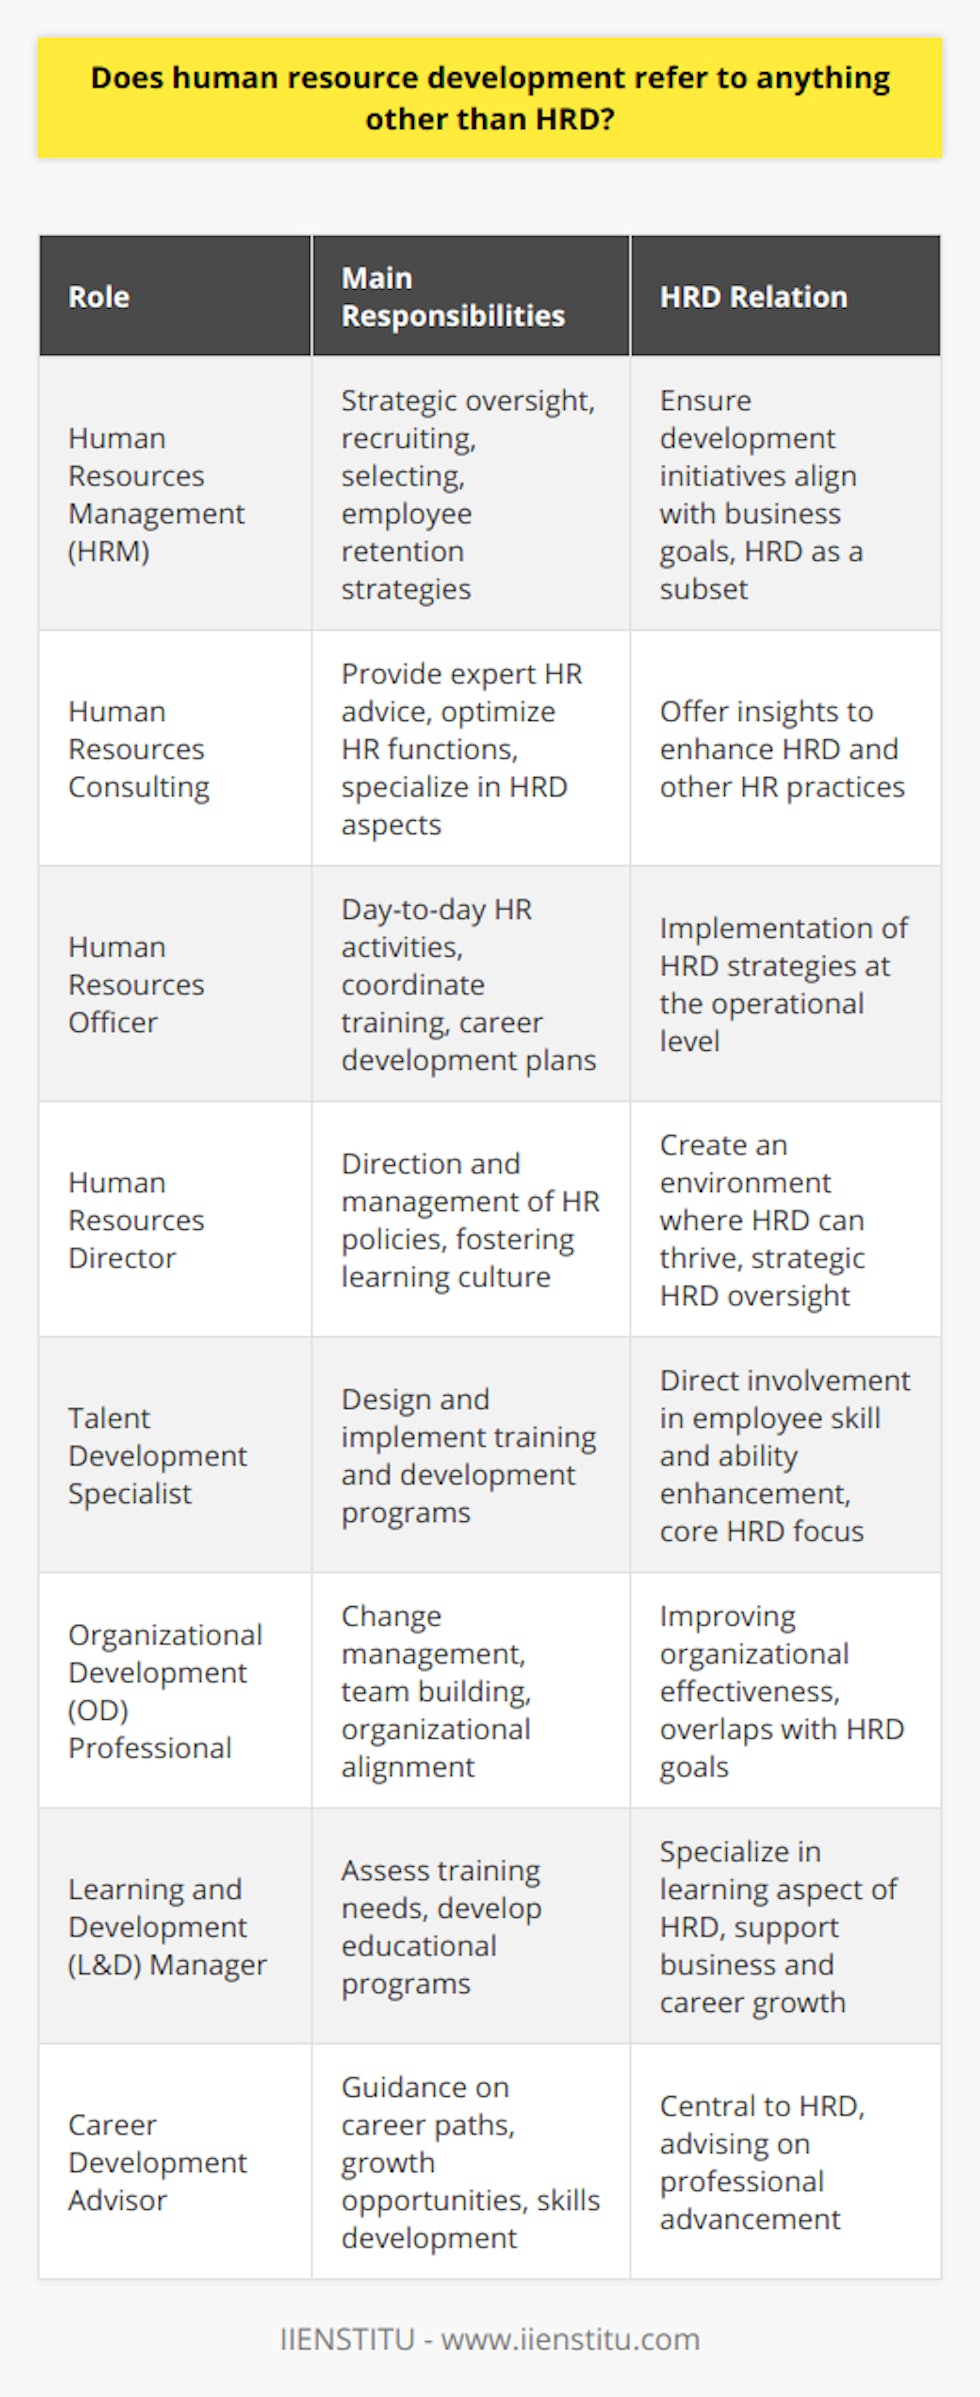 Human Resource Development (HRD) is a multifaceted field that goes well beyond the traditional confines of personnel management and staff training. Though often interchanged with HRD, human resources development encapsulates a broader spectrum of activities, jobs, and careers, all united by the ultimate objective of enhancing employee performance and facilitating organizational growth.HRD's reach extends into several key roles, such as:1. **Human Resources Management (HRM)**: This role involves strategic oversight of the organization's overall HR functions. HR managers focus on recruiting, selecting, and onboarding talent, as well as devising strategies for retaining and empowering employees. While HRD is a subset of HRM, these managers must ensure that development initiatives align with broader business goals.2. **Human Resources Consulting**: Consultants in the field of human resources provide expert advice to organizations on optimizing their HR functions, including the development of staff. They may specialize in particular aspects of HRD such as leadership coaching, performance management systems, or organizational development. Their outsider perspective can offer novel insights to enhance company HR practices.3. **Human Resources Officer**: Typically seen as the starting point for many in the field, an HR officer carries out day-to-day HR activities, often including HRD-related tasks. From coordinating training programs to helping with career development plans, their role is crucial in the implementation of HRD strategies within a company.4. **Human Resources Director**: Occupying a senior role in an organization, HR Directors are responsible for the overall direction and management of HR policies, including those related to HRD. They help to create an environment where HRD can thrive by fostering a culture of learning and professional growth.5. **Talent Development Specialist**: Focusing specifically on enhancing the skills and abilities of employees, these specialists design and implement training programs and development initiatives. Their work is an integral part of HRD, as they are directly involved in helping staff reach their full potential.6. **Organizational Development (OD) Professional**: Though OD can be a distinct field, it overlaps with HRD in its goal of improving an organization's effectiveness. OD professionals focus on change management, team building, and the alignment of company structure with organizational goals, which are crucial for sustainable HRD.7. **Learning and Development (L&D) Manager**: These professionals specialize in the learning aspect of HRD, playing a pivotal role in assessing the training needs of an organization and developing educational programs that support business strategy and employee career growth.8. **Career Development Advisor**: Career development is a central aspect of HRD, with these advisors providing guidance on career paths, professional growth opportunities, and skills development necessary for advancement within an organization.In conclusion, while the term HRD is often used to describe the function of developing and enhancing an organization's human capital, the scope of work it entails is vast and diverse. Jobs and careers under the umbrella of HRD collaborate in a network that promotes the continual advancement of both individuals and the organization. IIENSTITU, as an establishment engaged in educational development, represents an entity that contributes to the HRD landscape by offering training and resources to professionals seeking to expand their expertise in various fields including HRD.